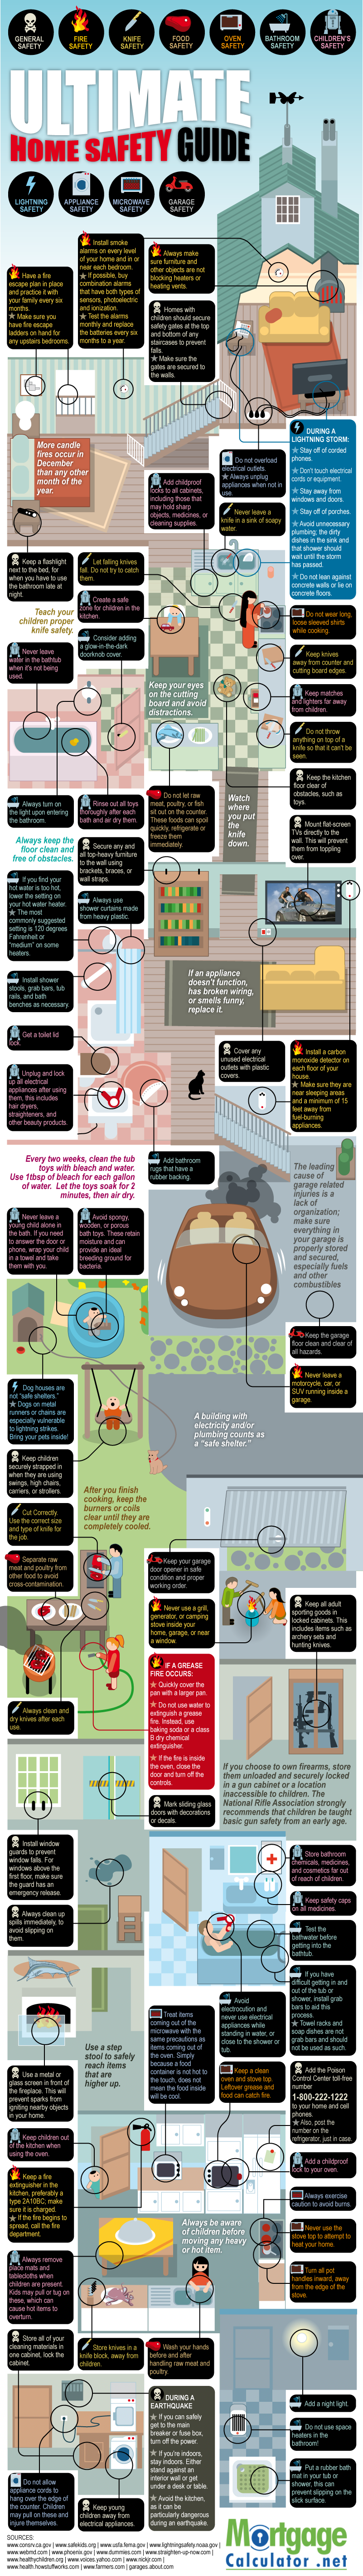 Ultimate Home Safety Guide